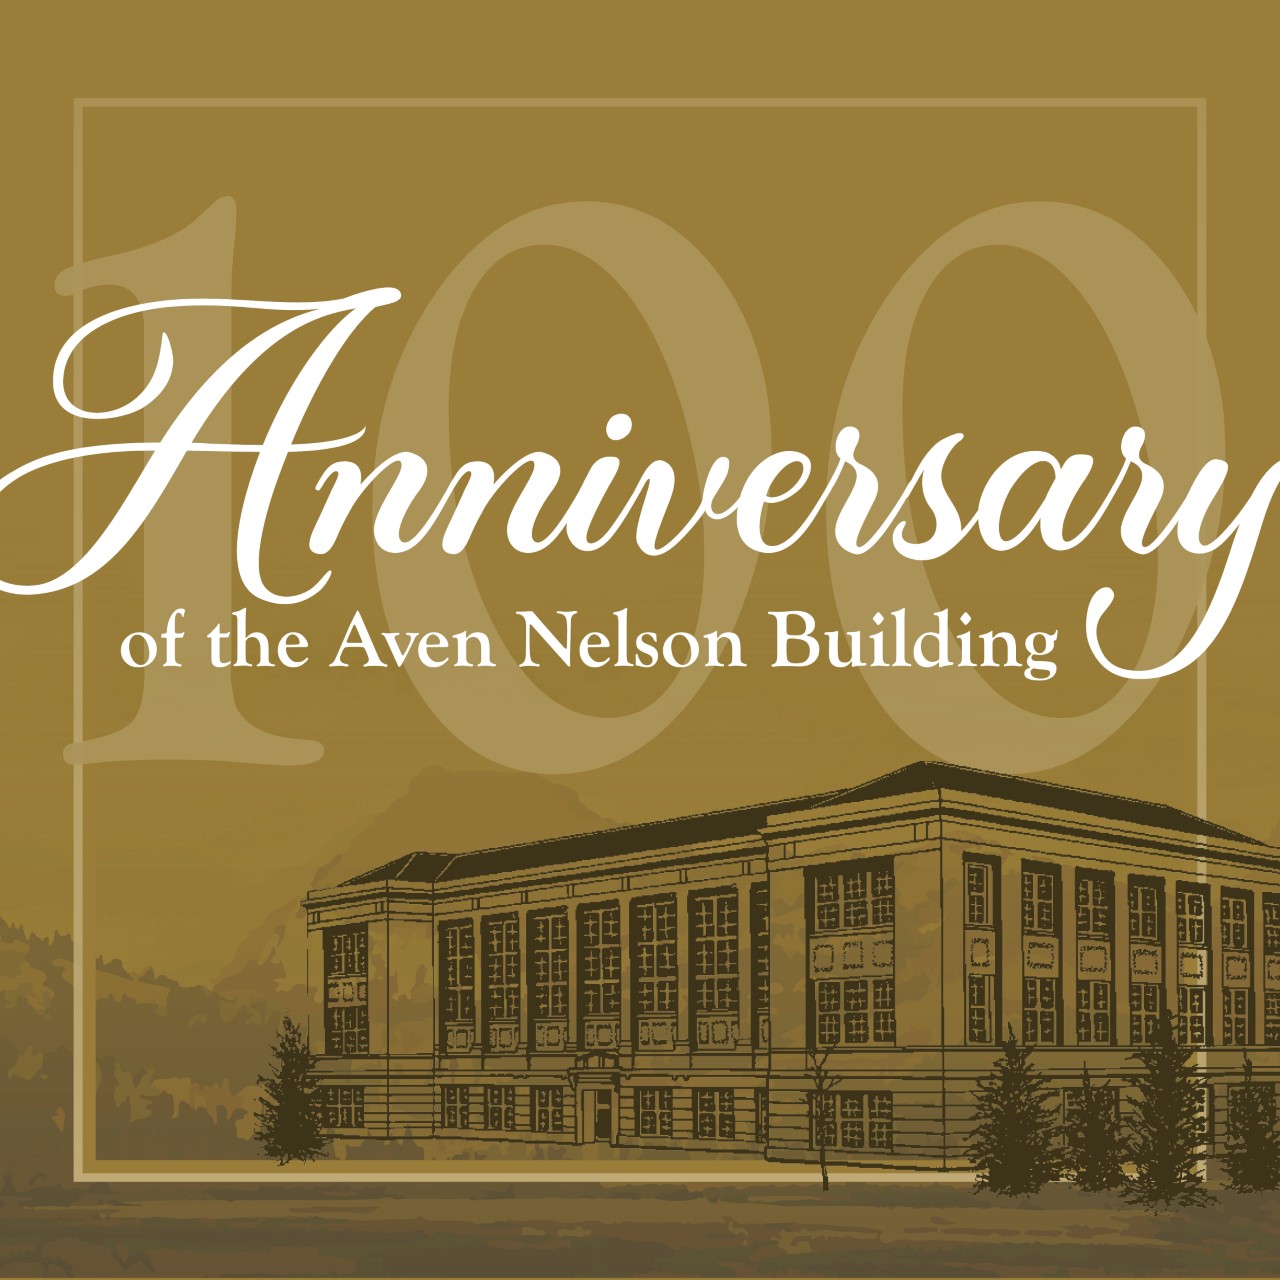 Join us, for the 100th Anniversary of the Aven Nelson Building!  Tours, Reception, Exhibits, Lecture